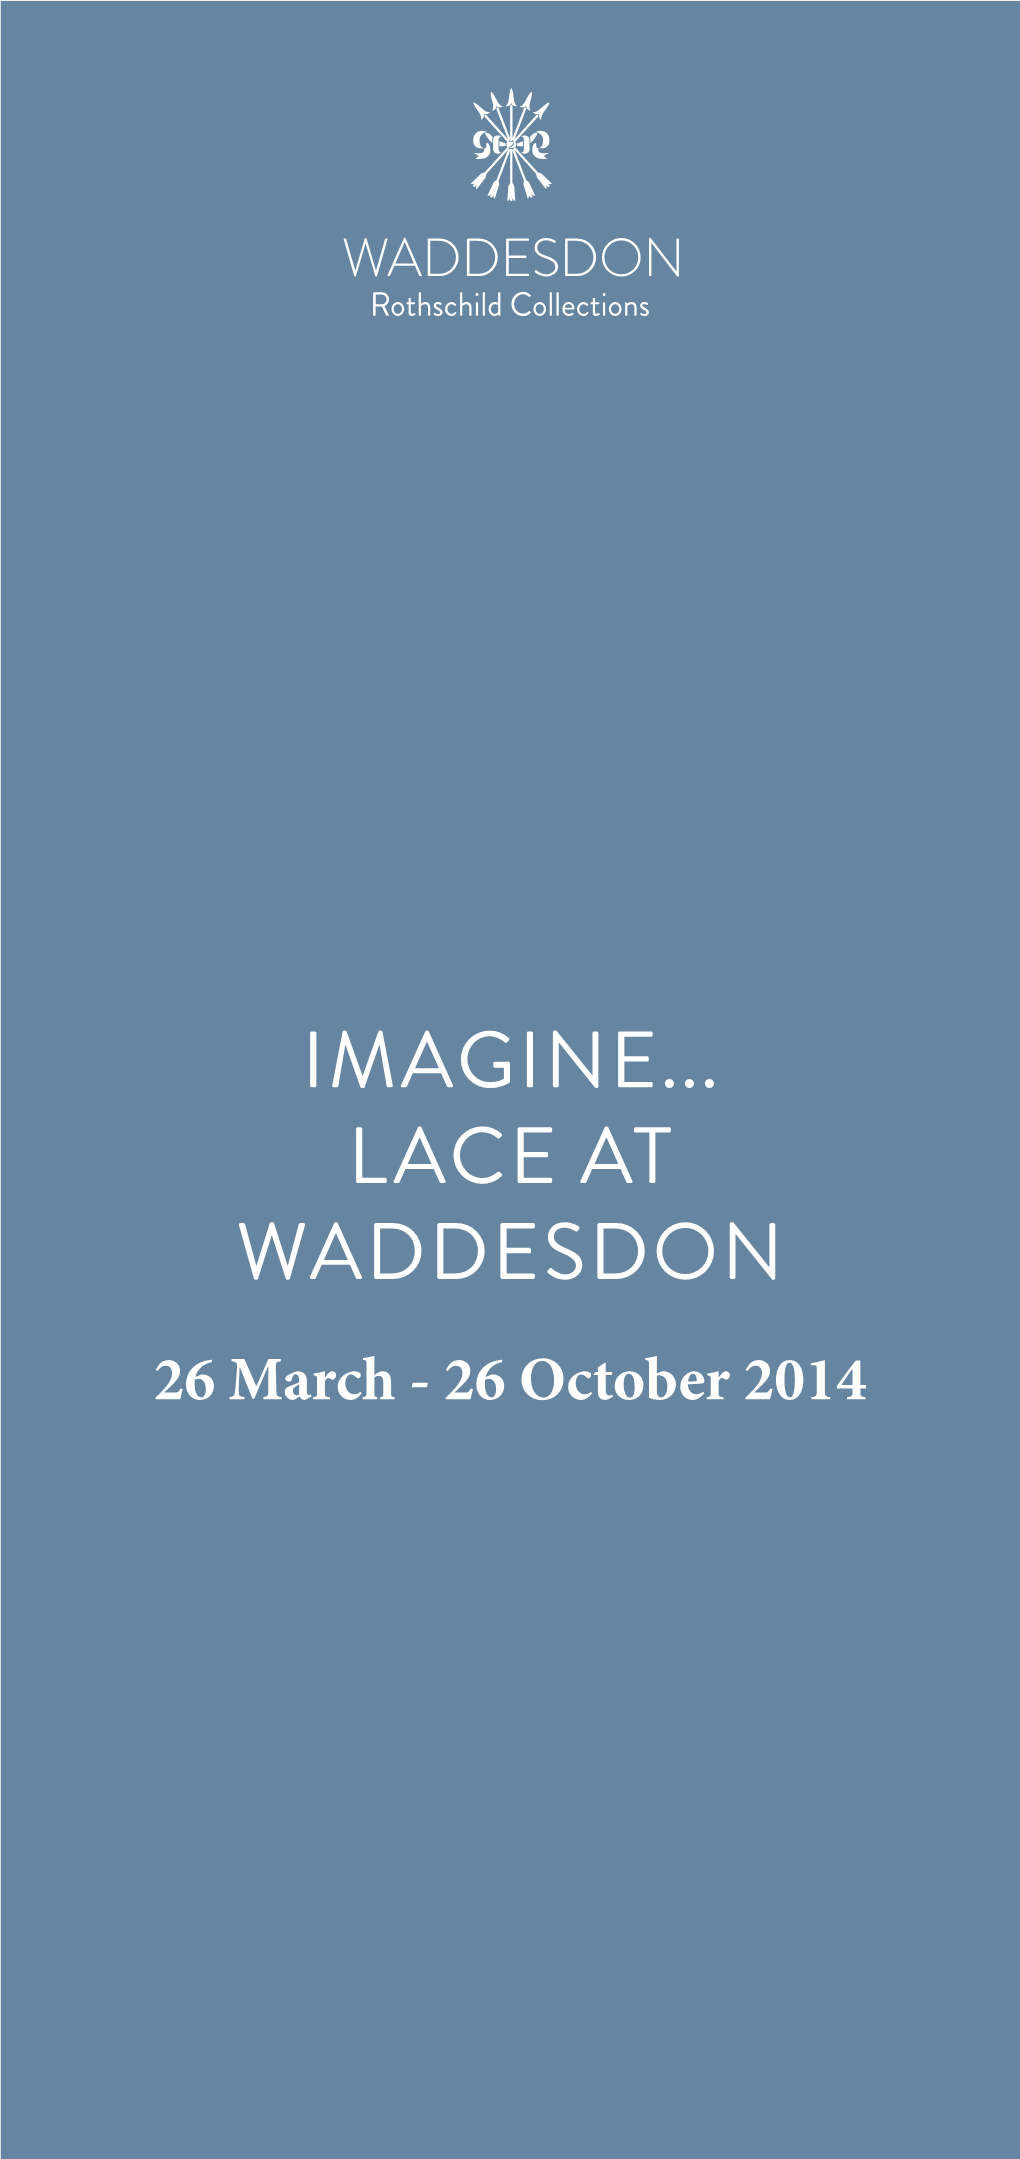 IMAGINE... LACE at WADDESDON 26 March - 26 October 2014